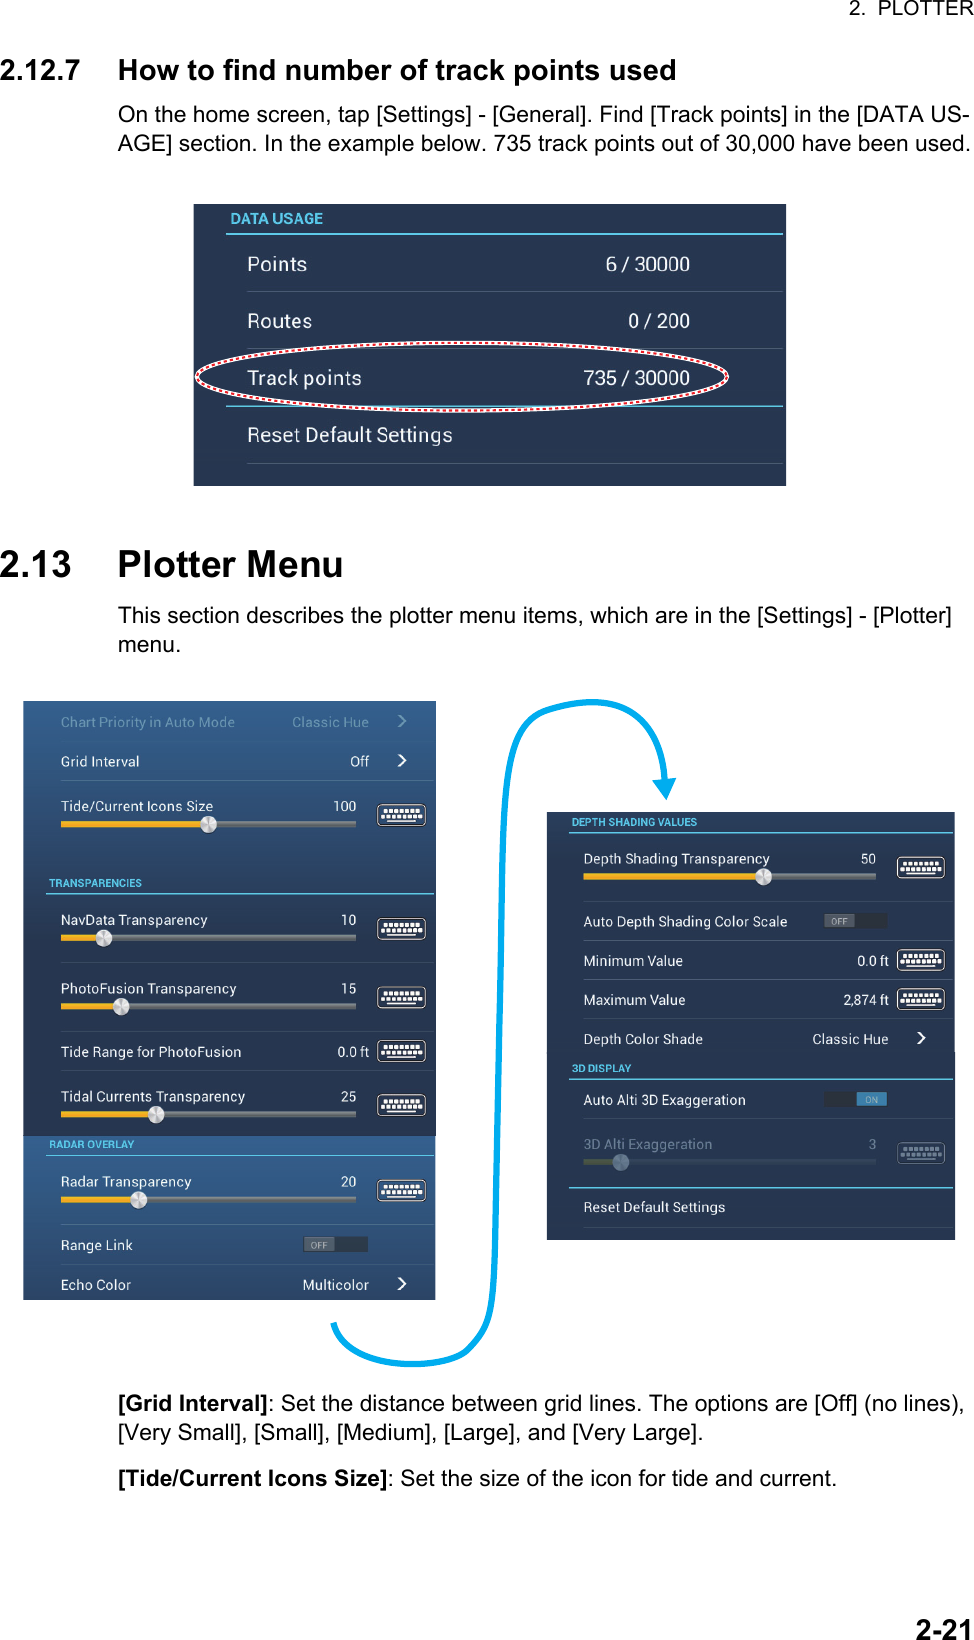 2.  PLOTTER2-212.12.7 How to find number of track points usedOn the home screen, tap [Settings] - [General]. Find [Track points] in the [DATA US-AGE] section. In the example below. 735 track points out of 30,000 have been used.2.13 Plotter MenuThis section describes the plotter menu items, which are in the [Settings] - [Plotter] menu.[Grid Interval]: Set the distance between grid lines. The options are [Off] (no lines), [Very Small], [Small], [Medium], [Large], and [Very Large].[Tide/Current Icons Size]: Set the size of the icon for tide and current.Chart Priority in Auto Mode